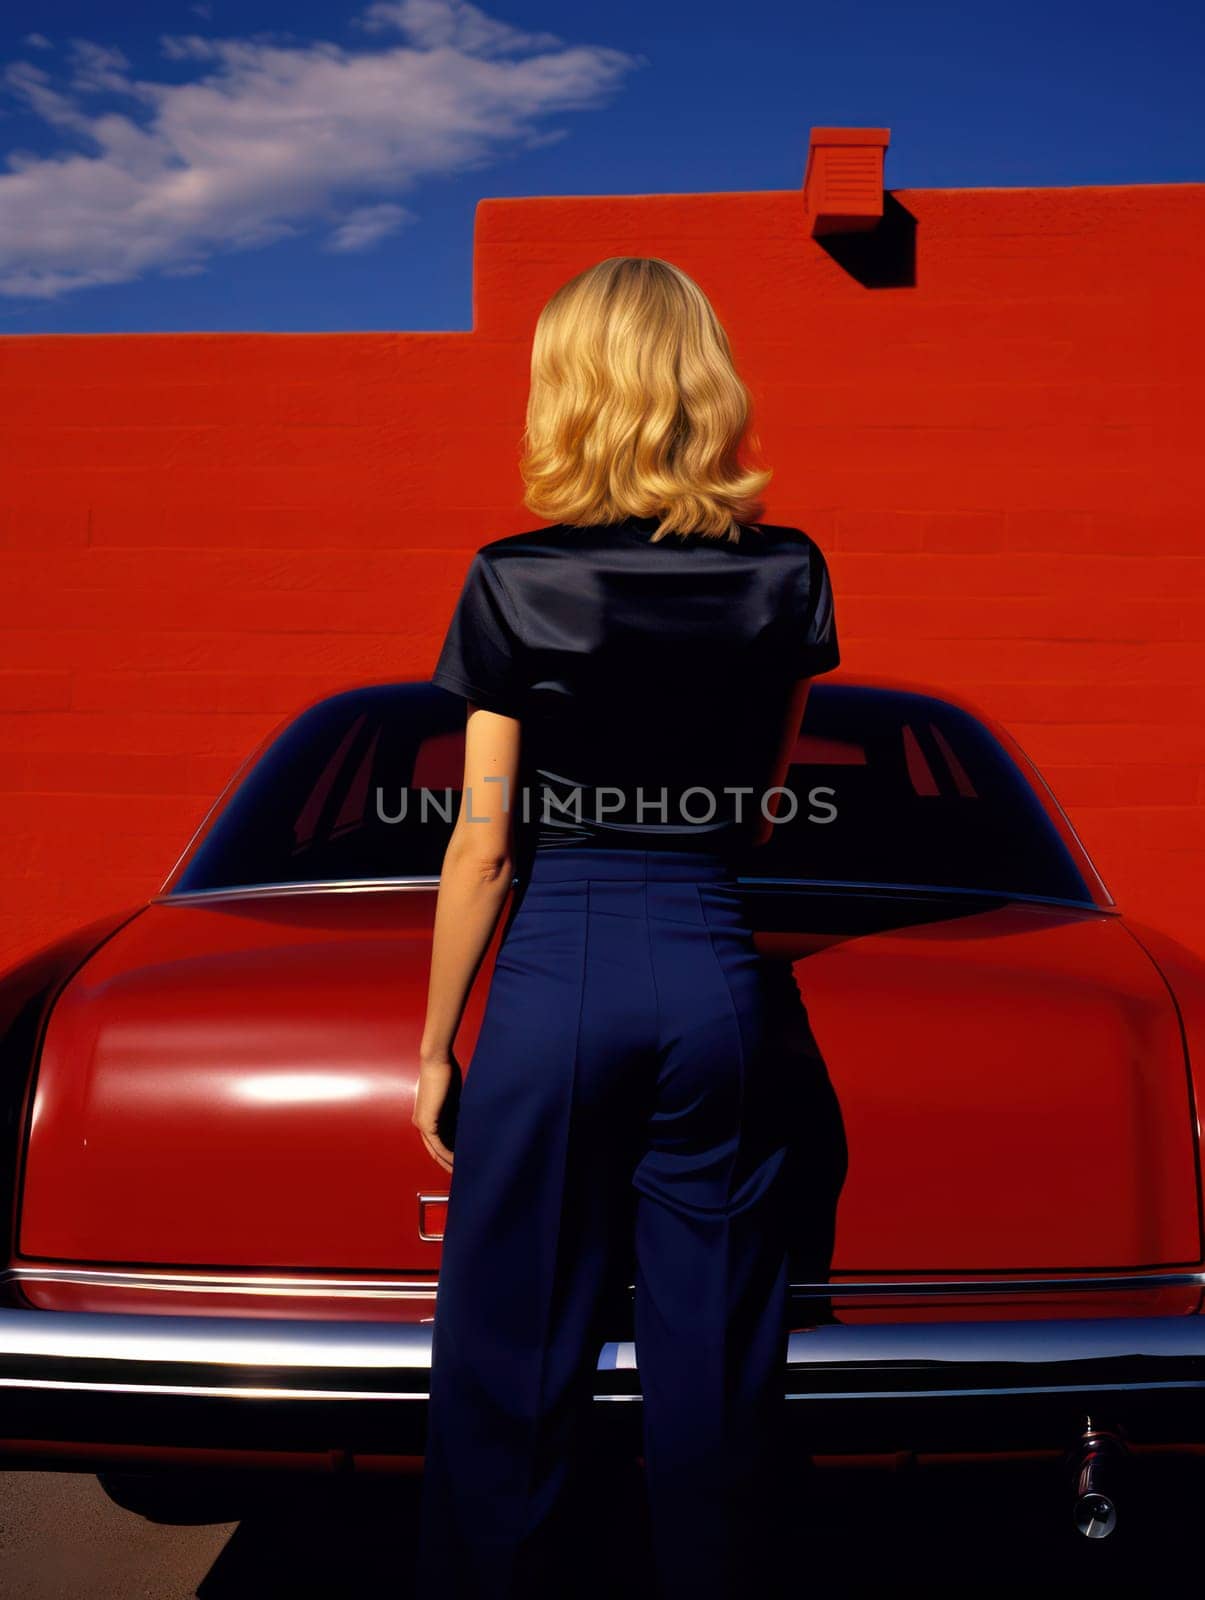 Red Retro Car, Radiant Beauty, and Carefree Summer Vibes: A Captivating Portrait of a Modern Vintage Lady in a Stylish Dress Standing Near a Classic Automobile on a Hot Street Under a Blue Sky by Vichizh